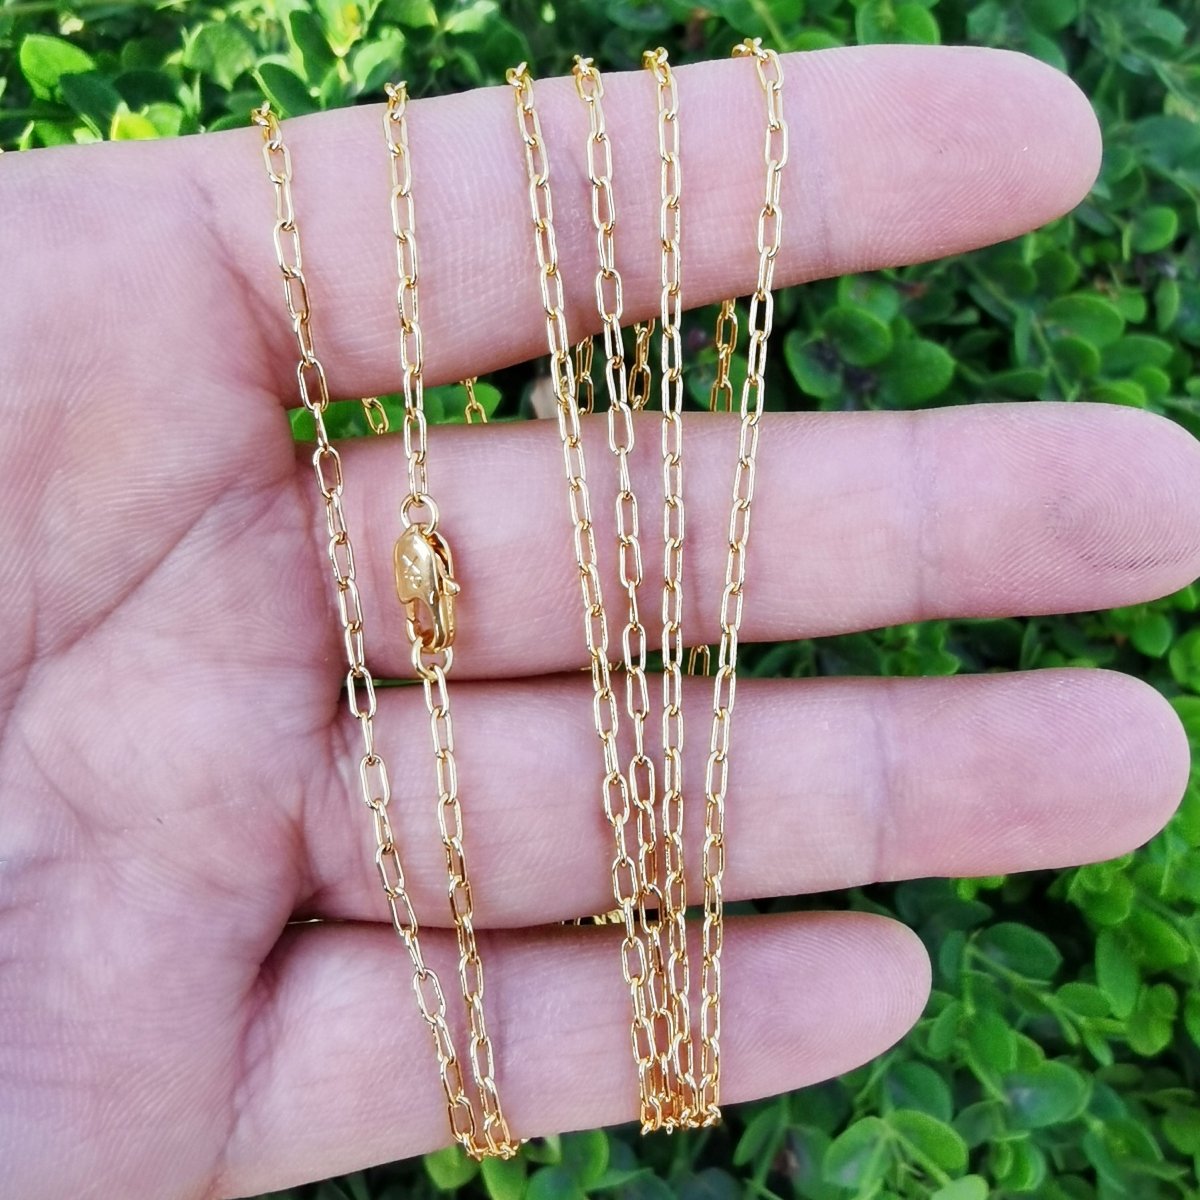 17'' Ready to Use 24K Gold Filled Thin Paper Clip Cable Necklace Chain, Layering Cable Chain Dainty Necklace, For Pendant Charm Necklace Making | WA-744 Clearance Pricing - DLUXCA